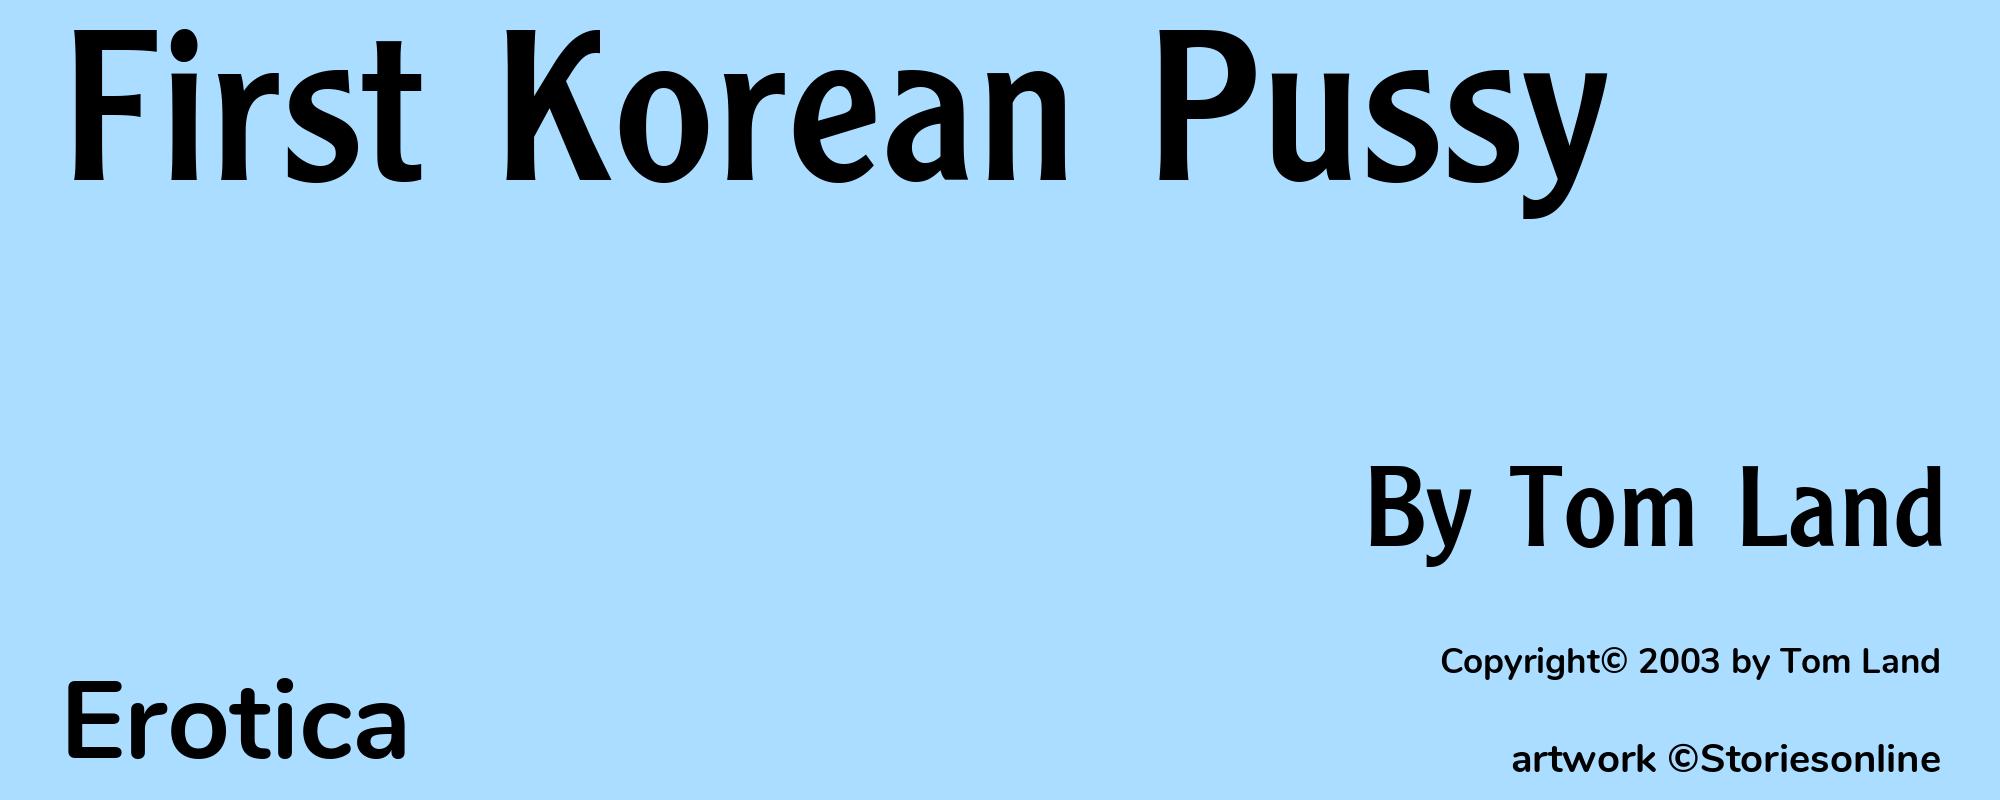 First Korean Pussy - Cover